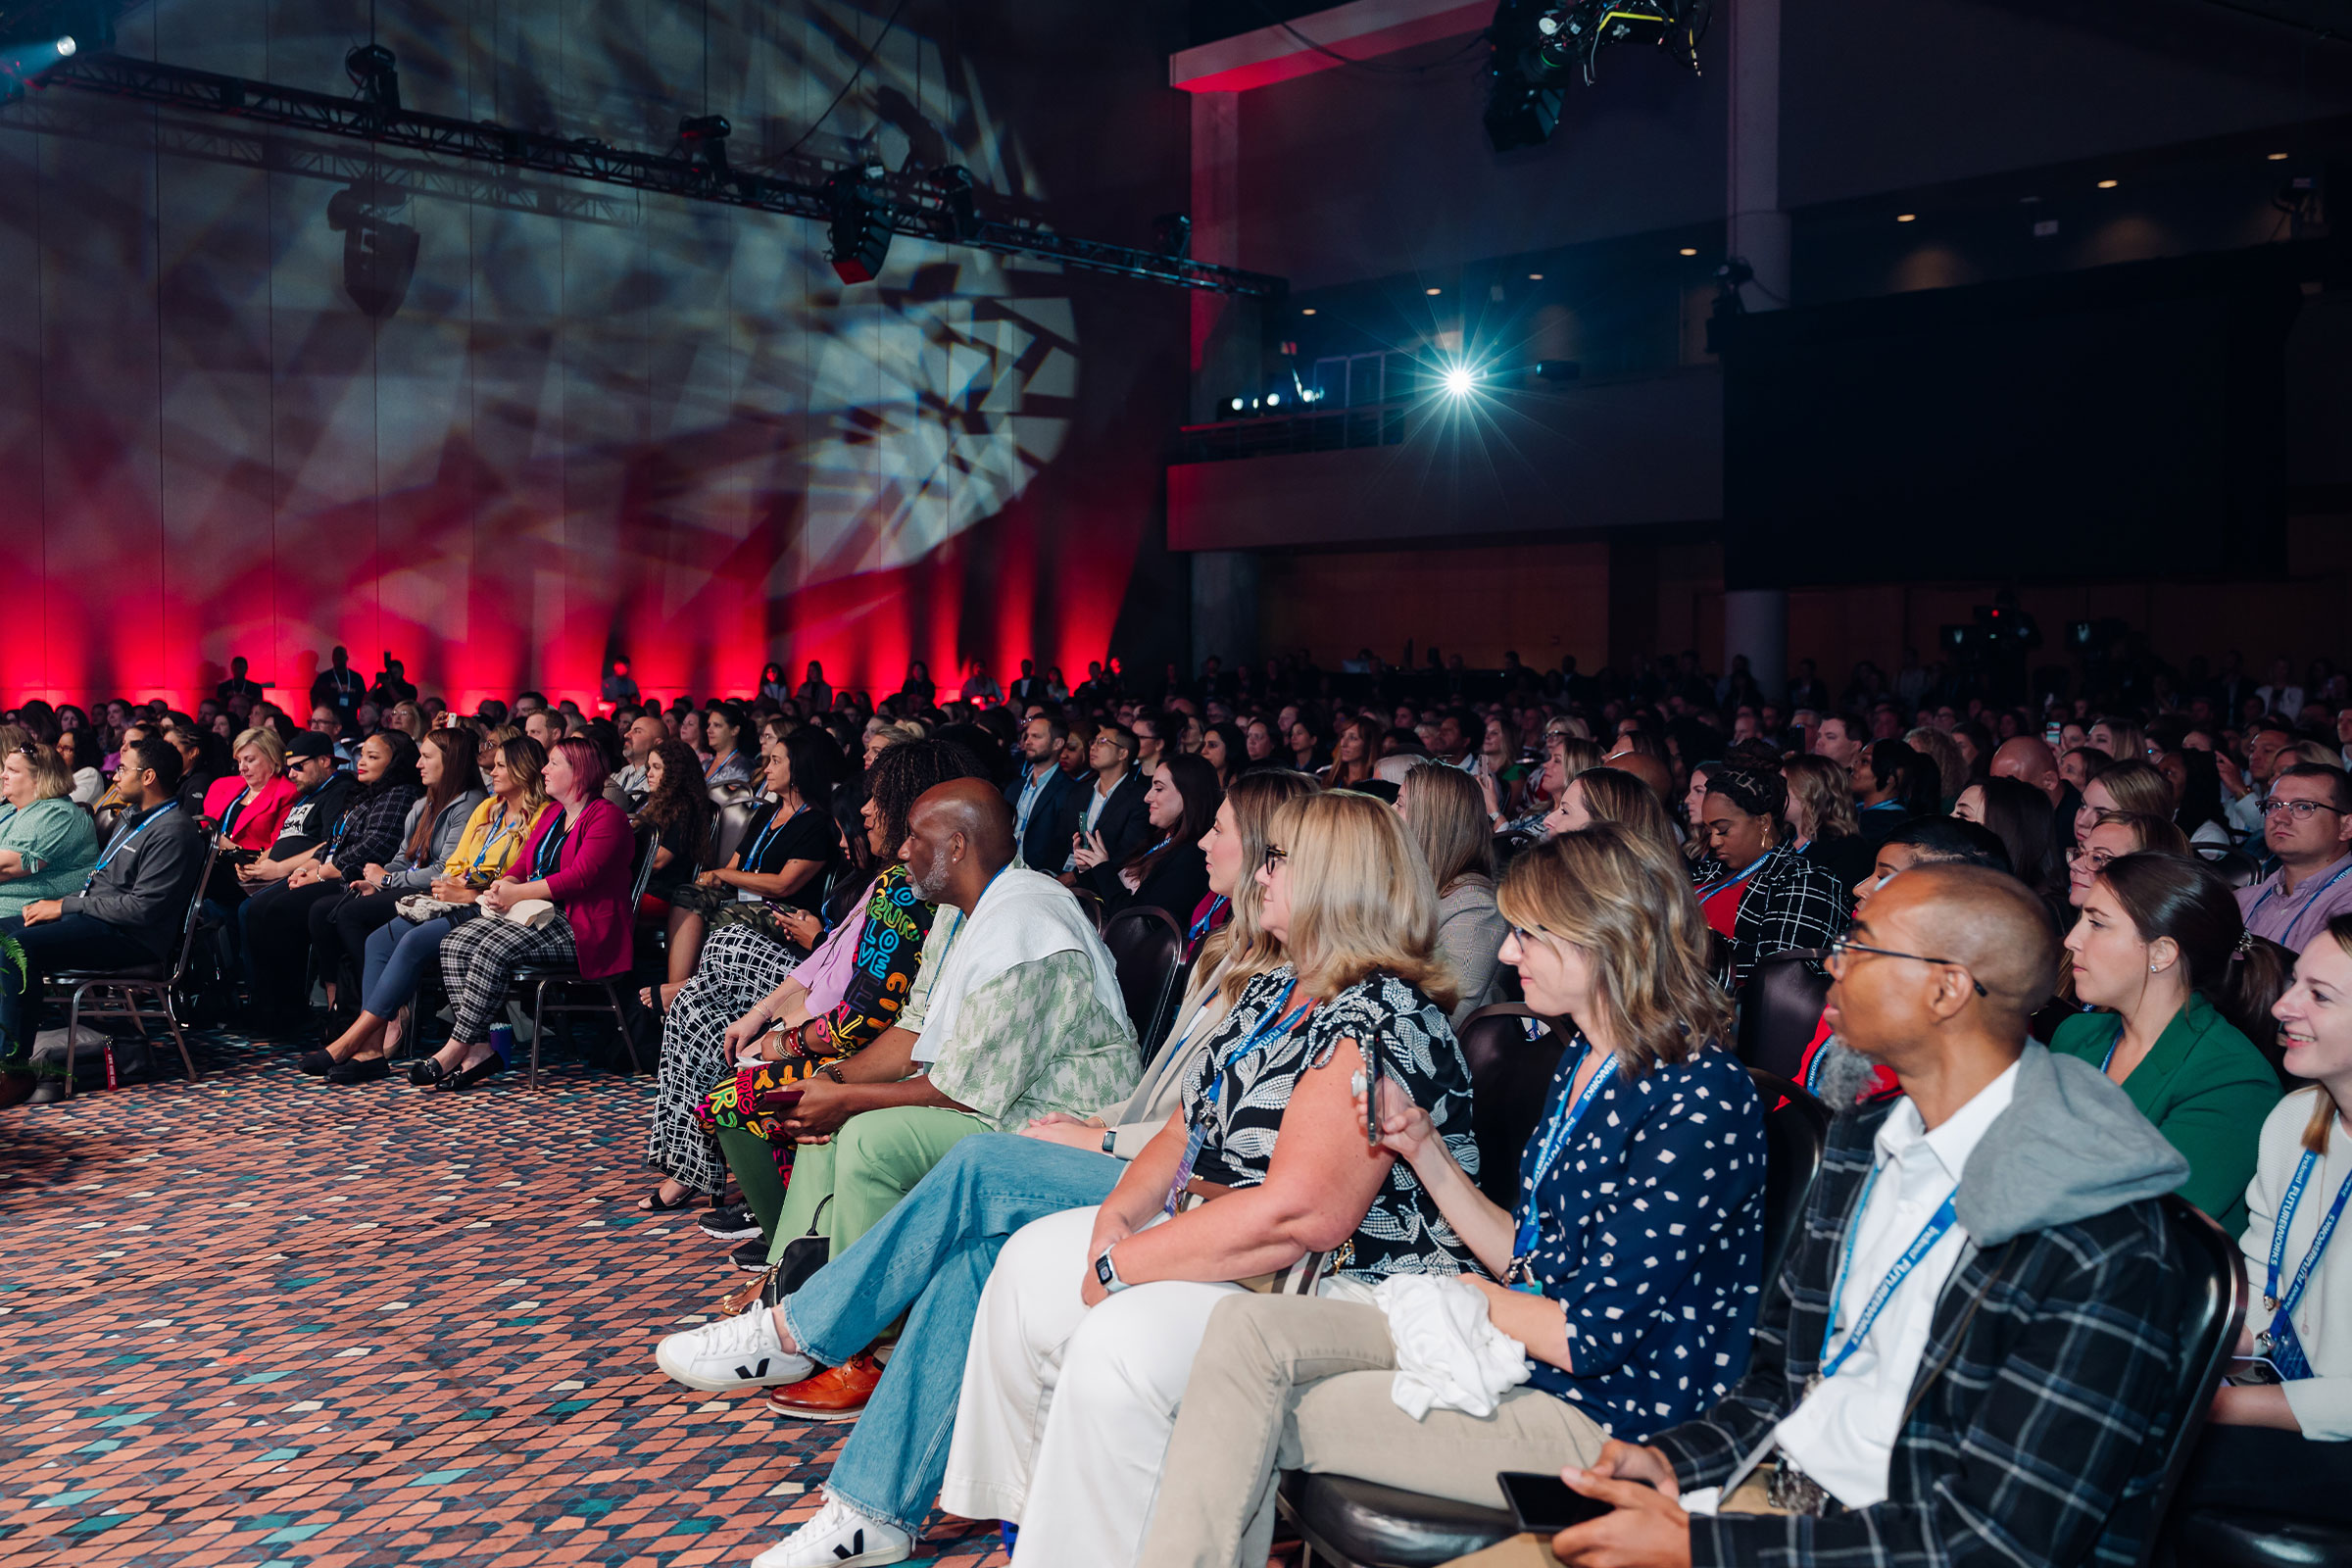 Find inspiration from celebrity keynote speakers and talent experts